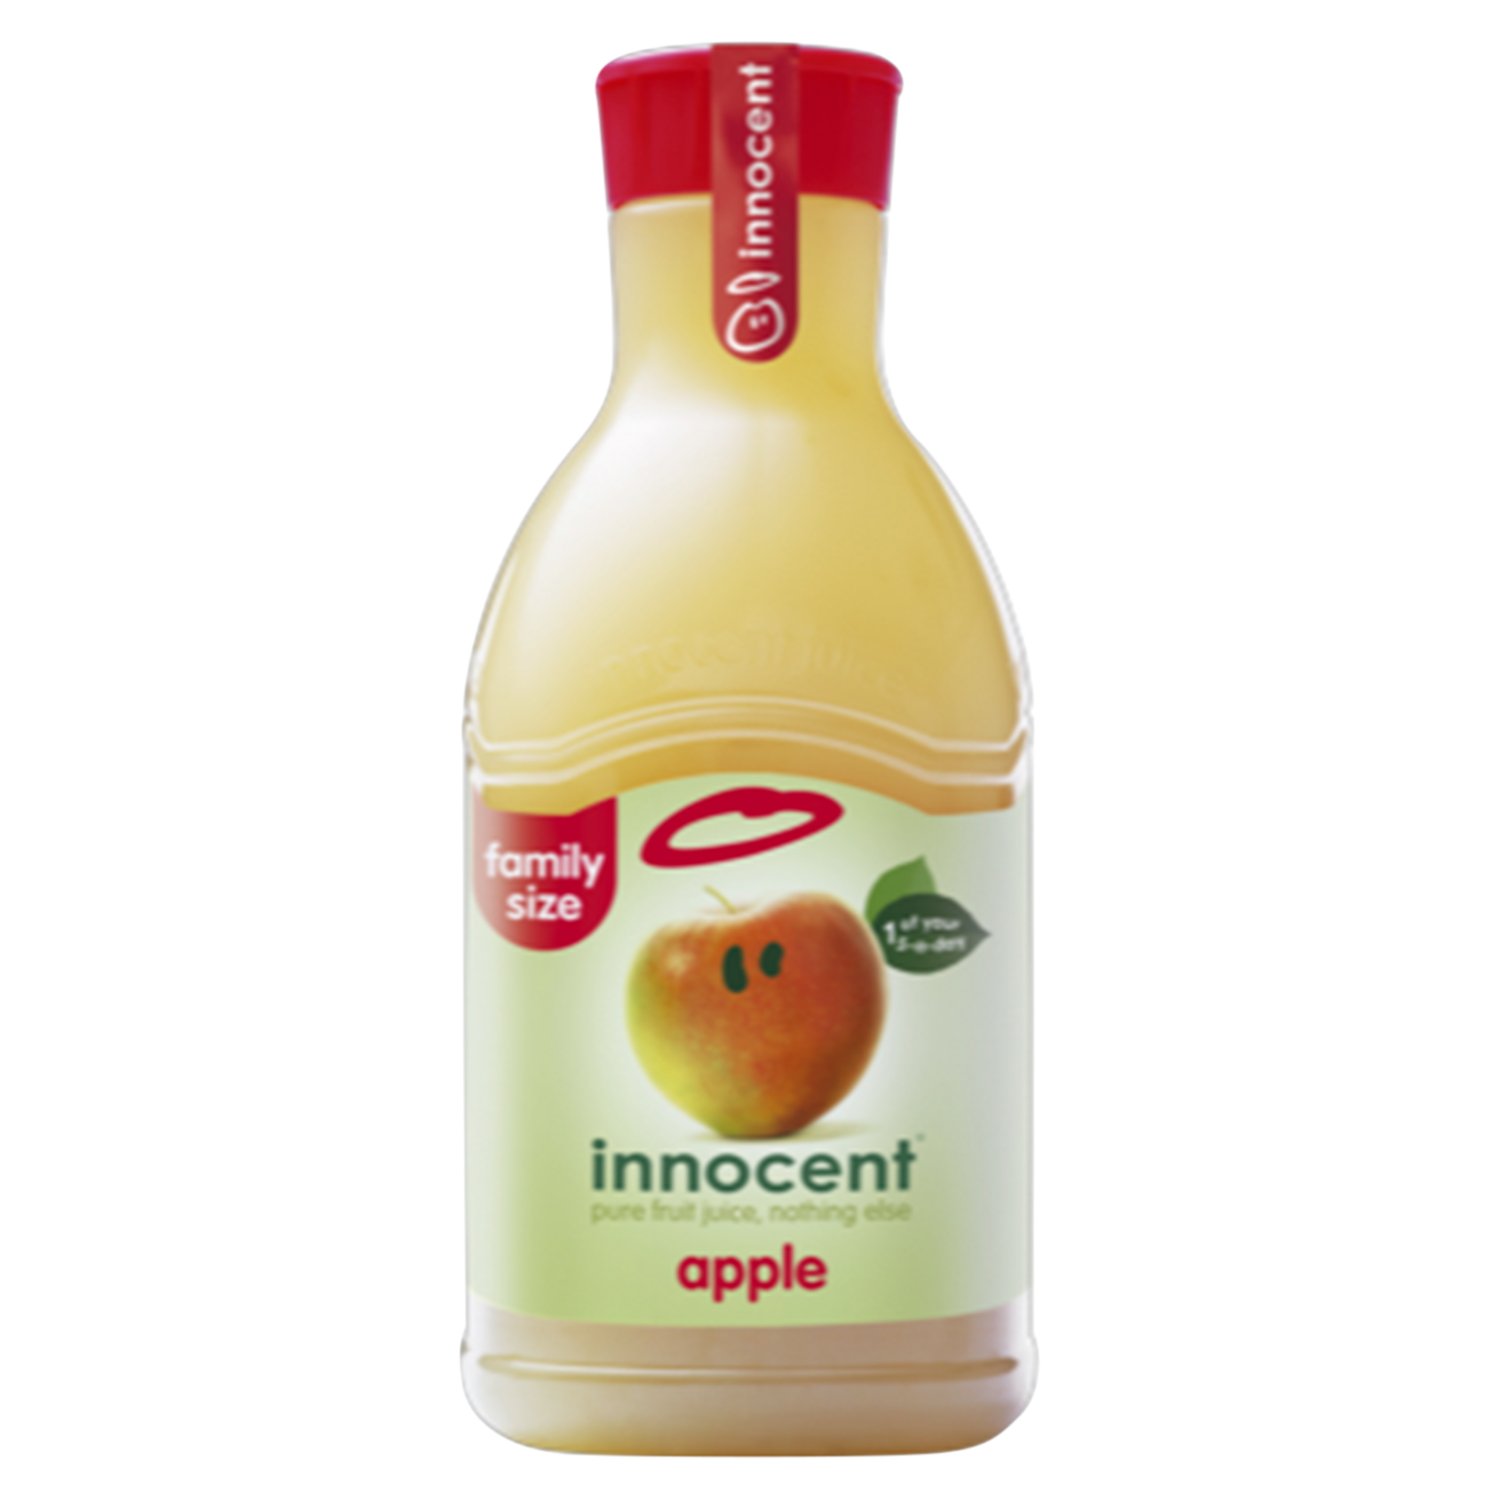 innocent Apple Juice 1.35L is a tasty drink not made from concentrate. This juice is a source of vitaminc C with 1 serving containing 1 of your 5 a day. The perfect way to start you morning! 

This bottle contains 12 freshly pressed apples. No artificial flavours or preservatives. 

Suitable for vegans and pasteurised.

Keep refrigerated (0-8ºC). Once opened, drink within 4 days.

The bottle is 100% recyclable, so please recycle when you're finished. We use partly recycled and fully recyclable bottles, refuse to air freight and source ethically

10% of our profits go to charity. See https://www.innocentdrinks.co.uk/things-we-do-for-people